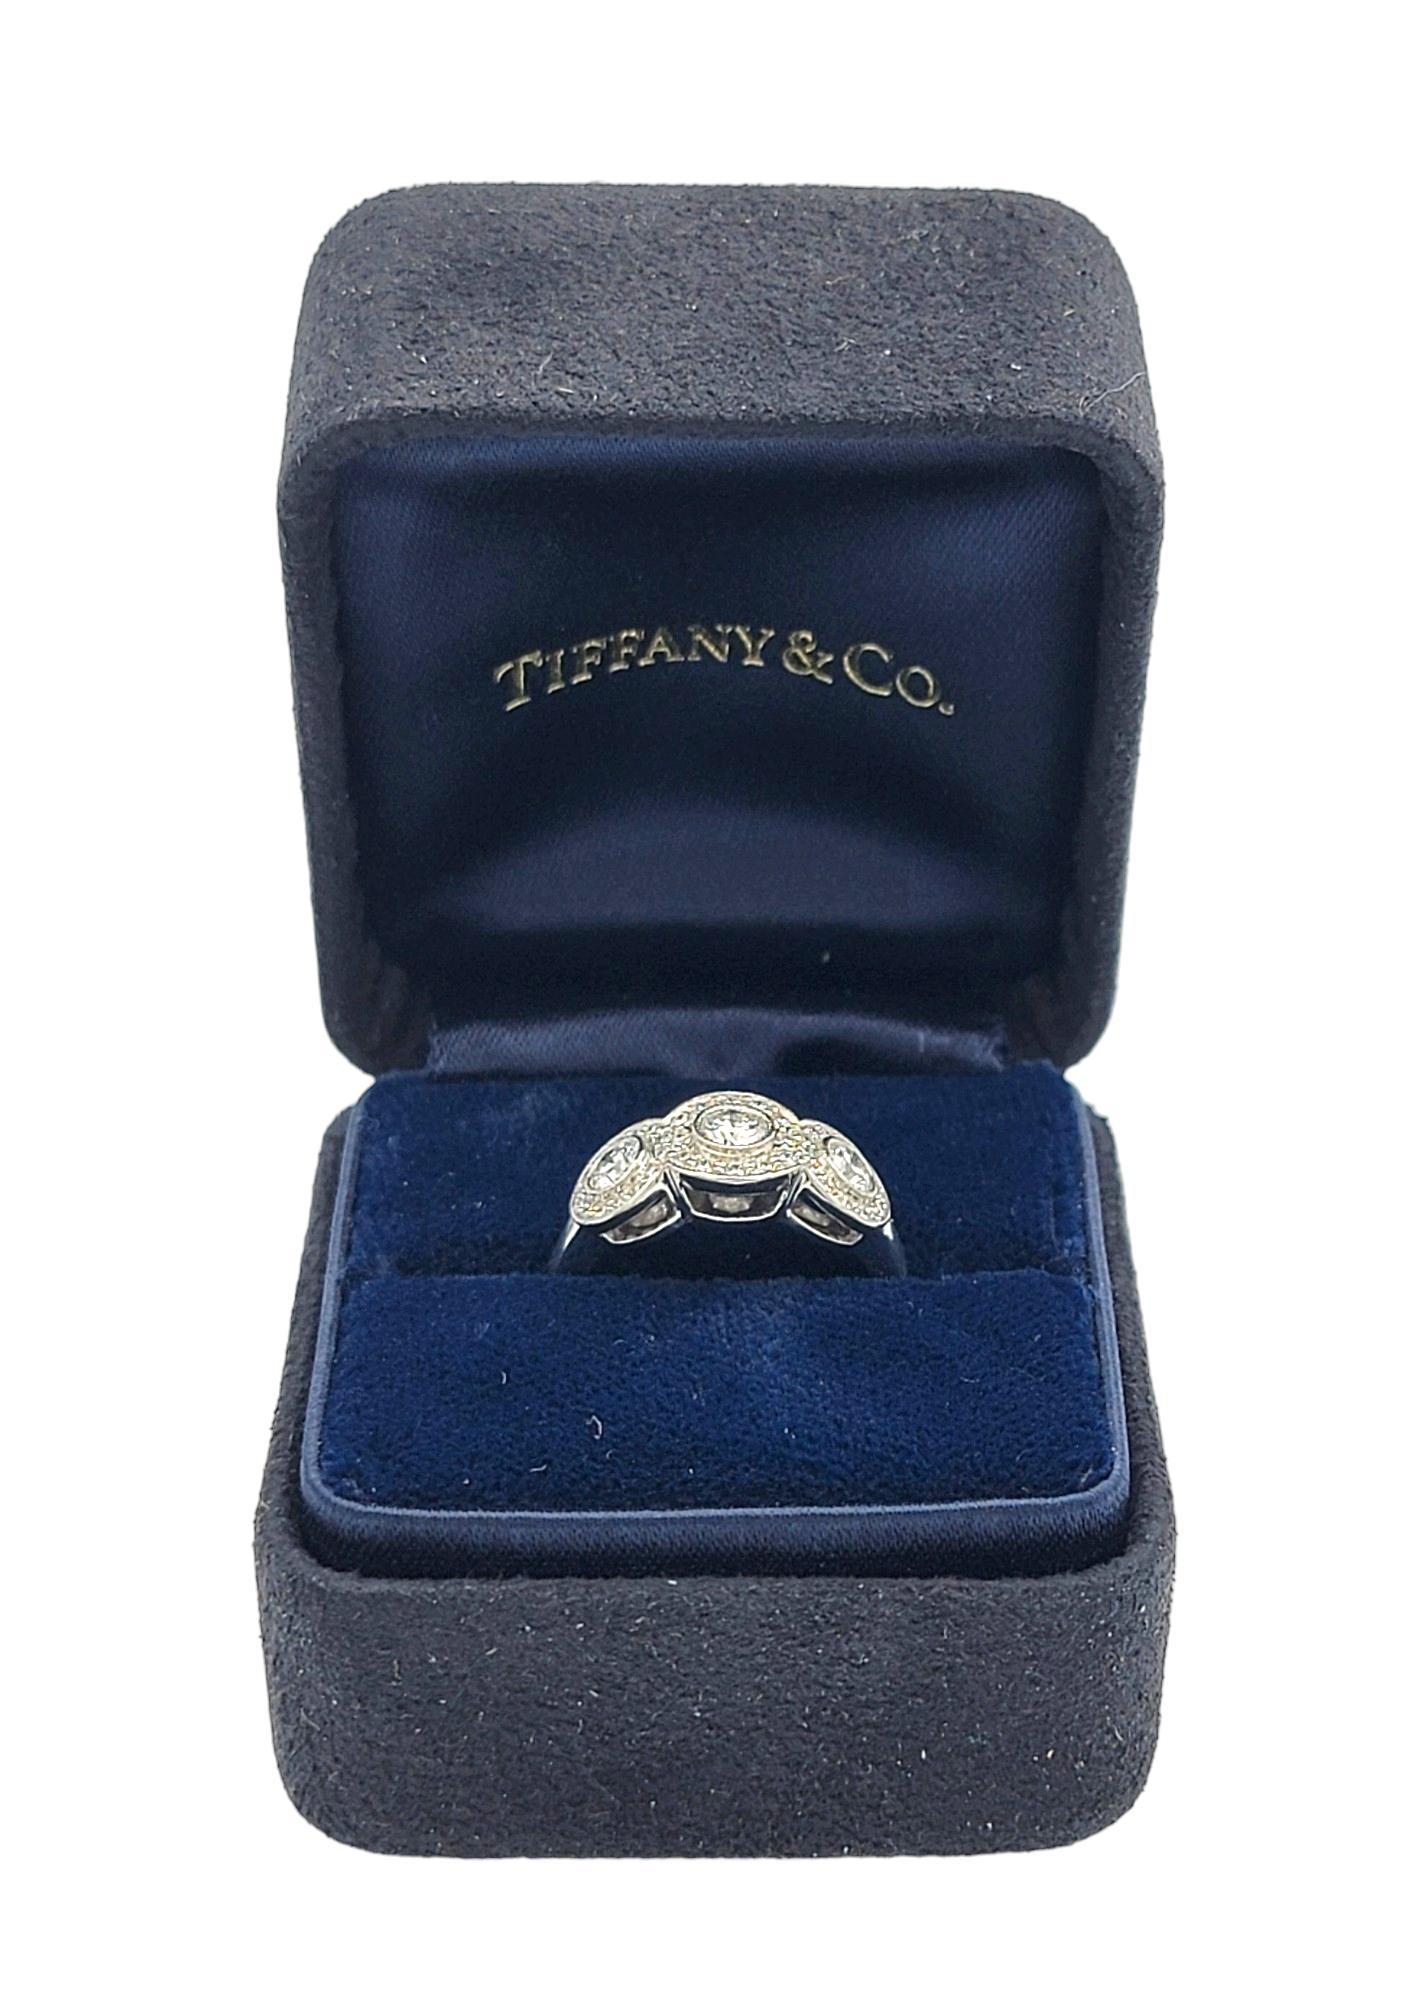 Tiffany & Co. Three Stone Circlet Diamond Halo Ring in Platinum Size 4.75 For Sale 3